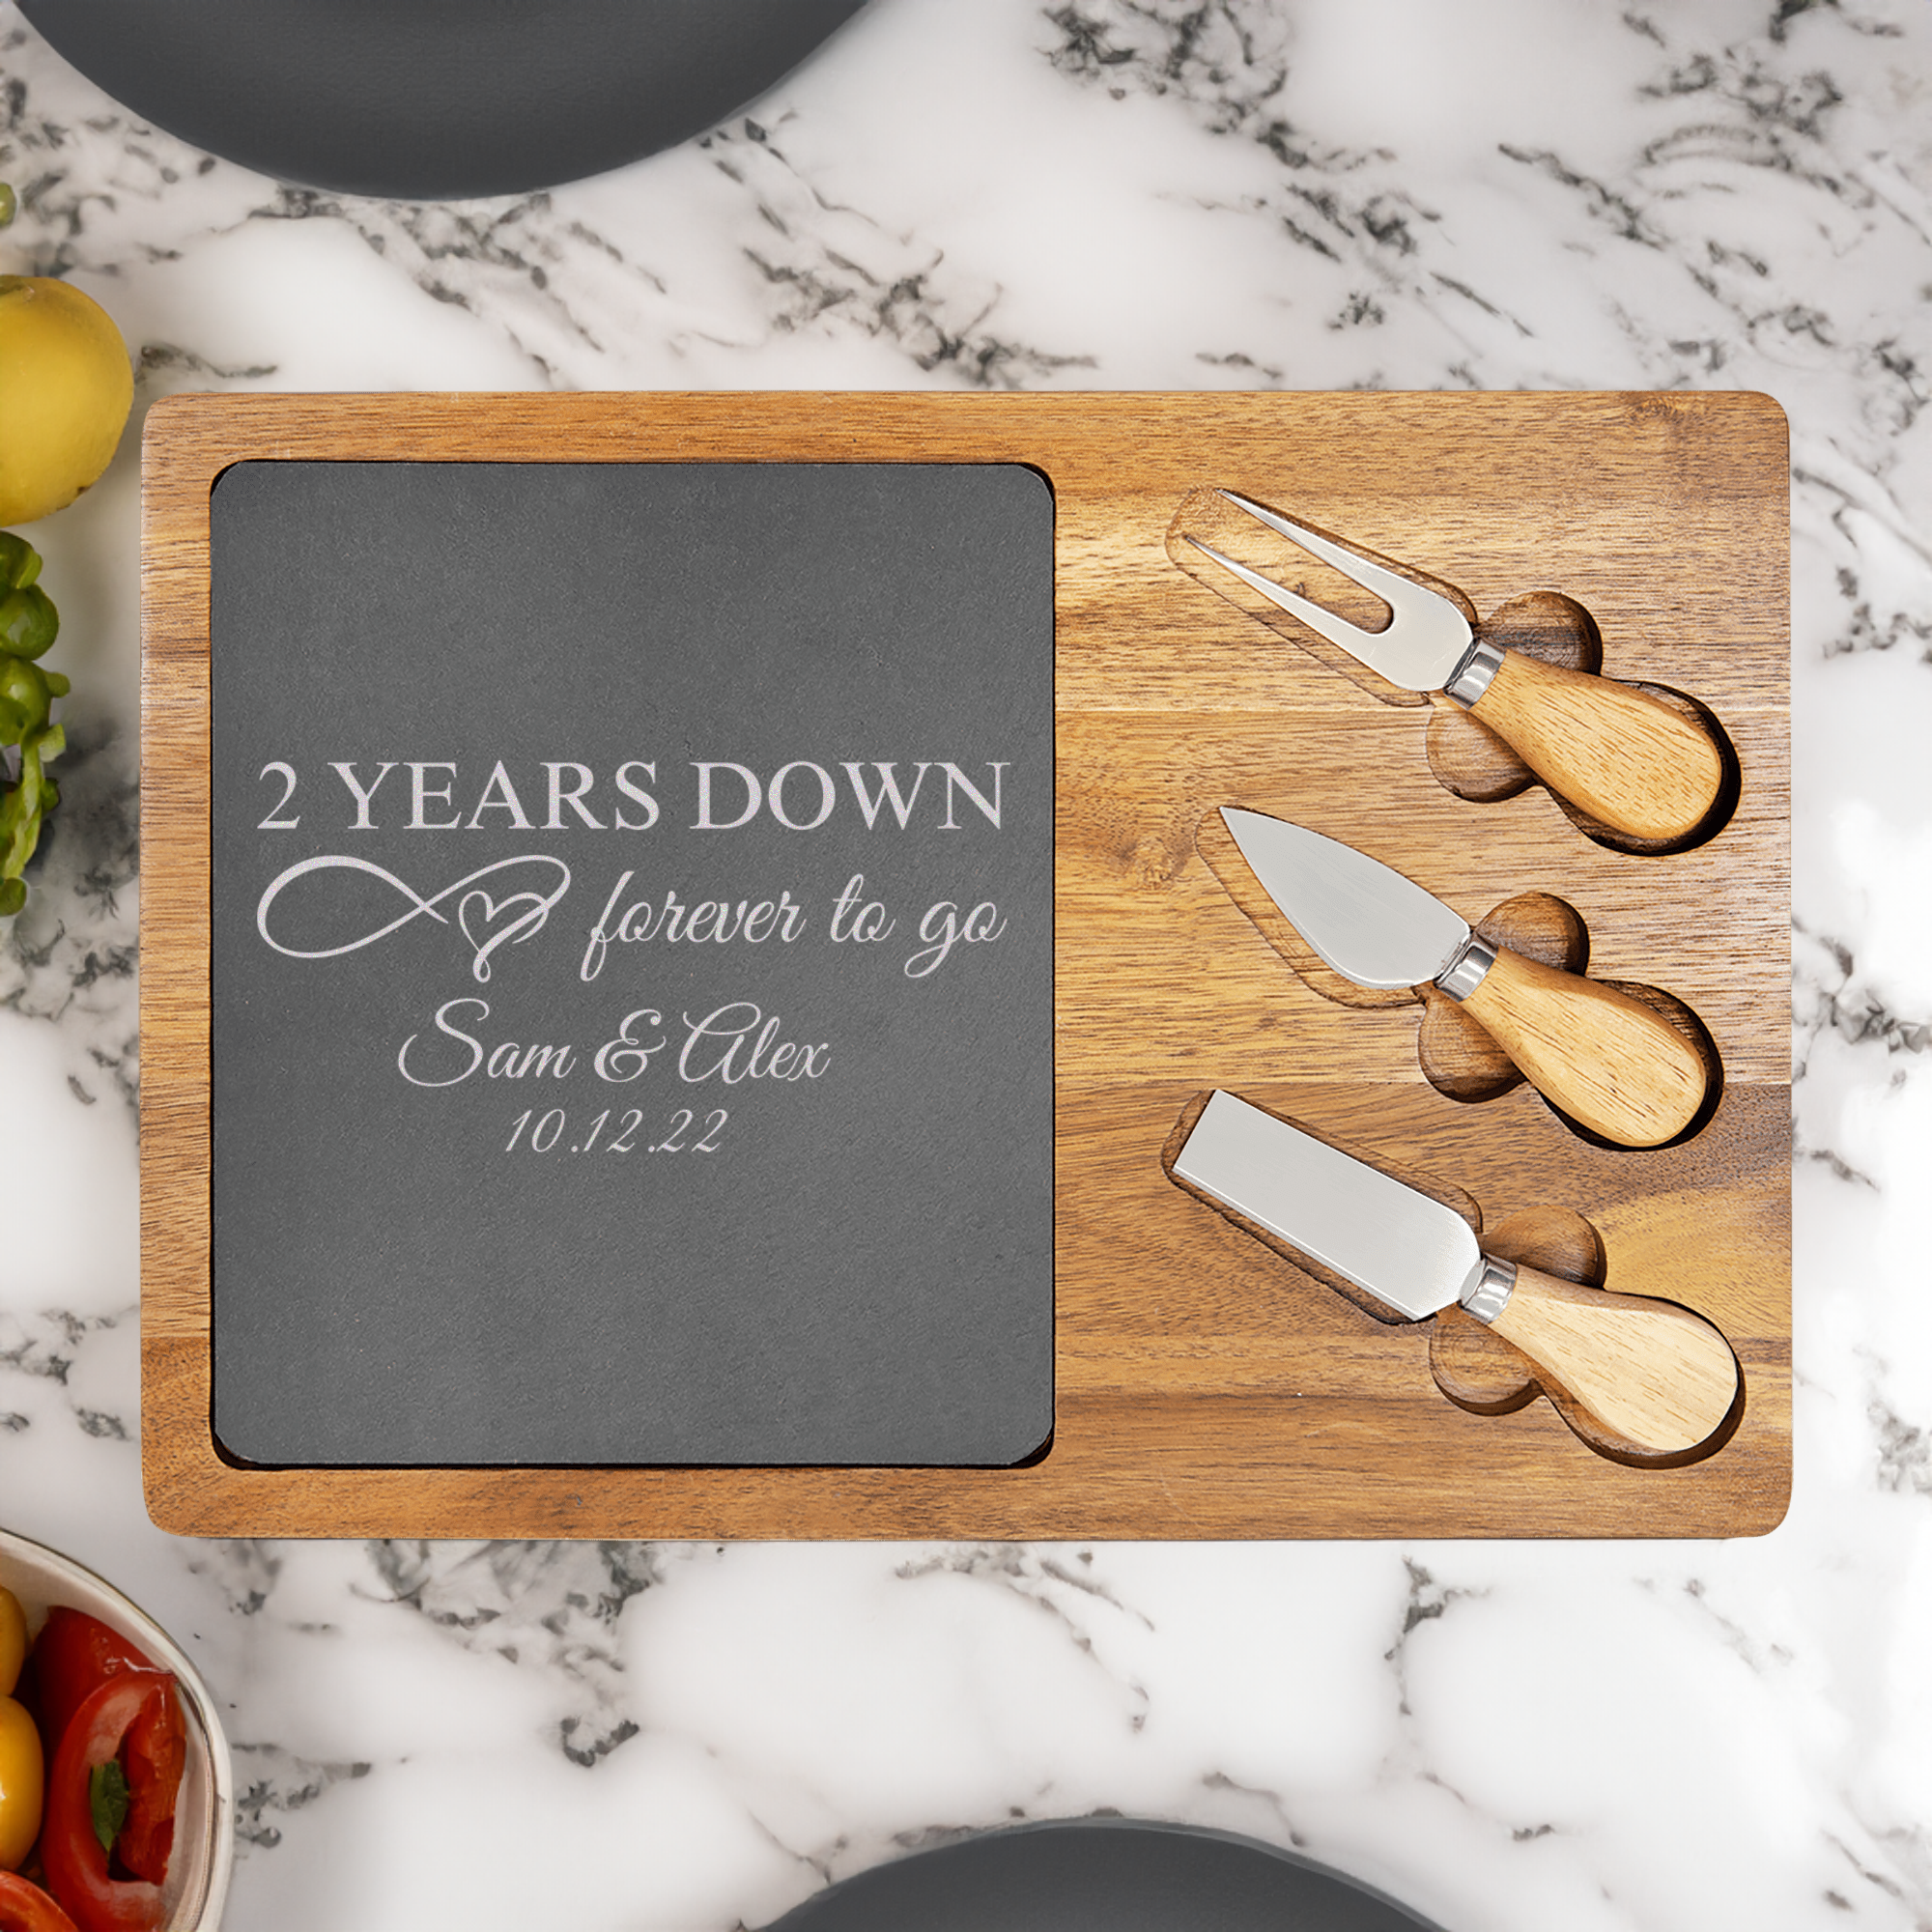 Two Years Down Wood Slate Serving Tray